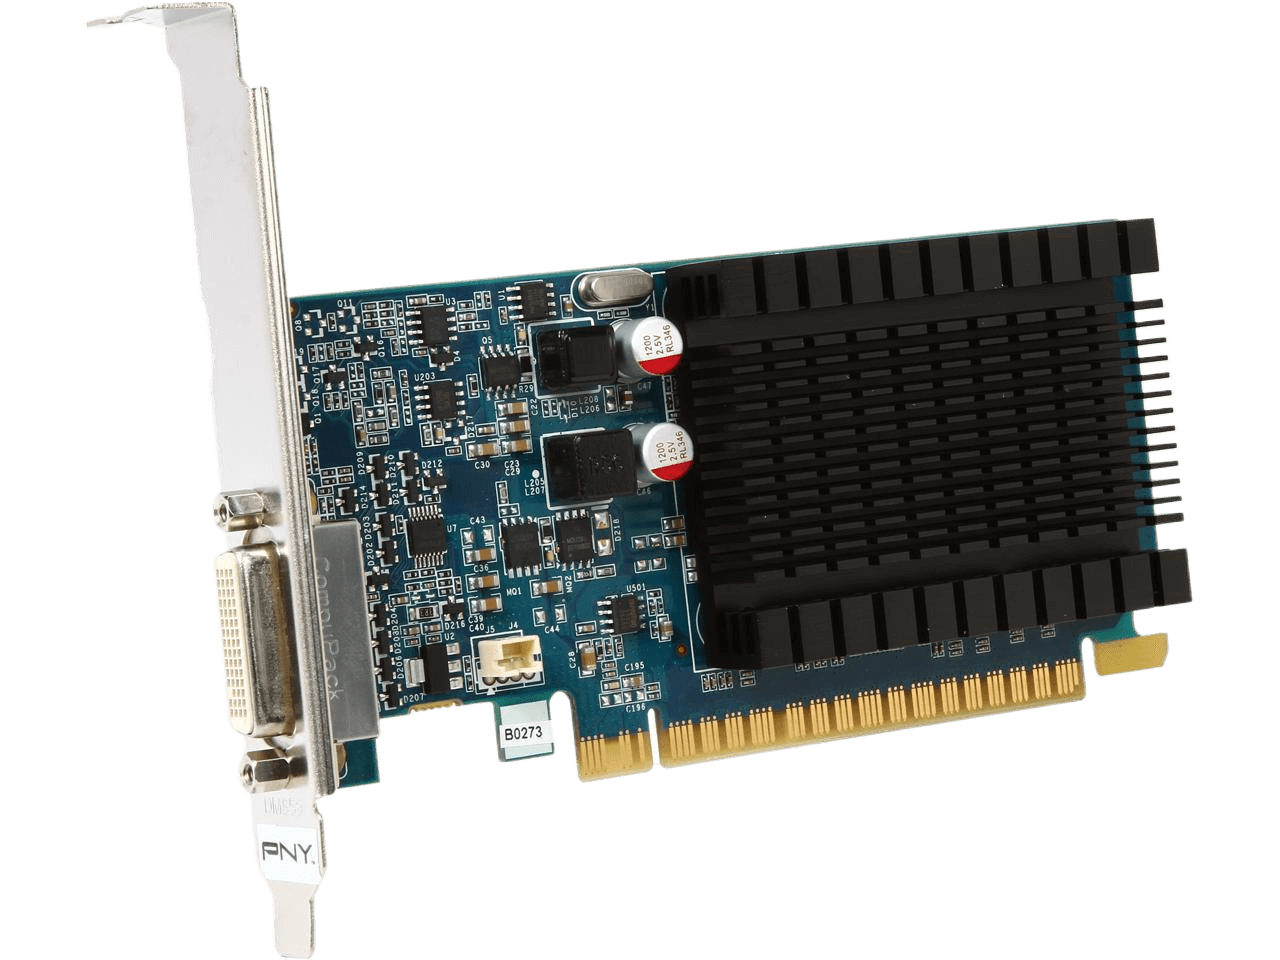 PNY NVIDIA GeForce 8400 GS 1GB DDR3 PCI Express 2.0 x16 Low Profile Video Card Commercial Series VCG84DMS1D3SXPB-CG